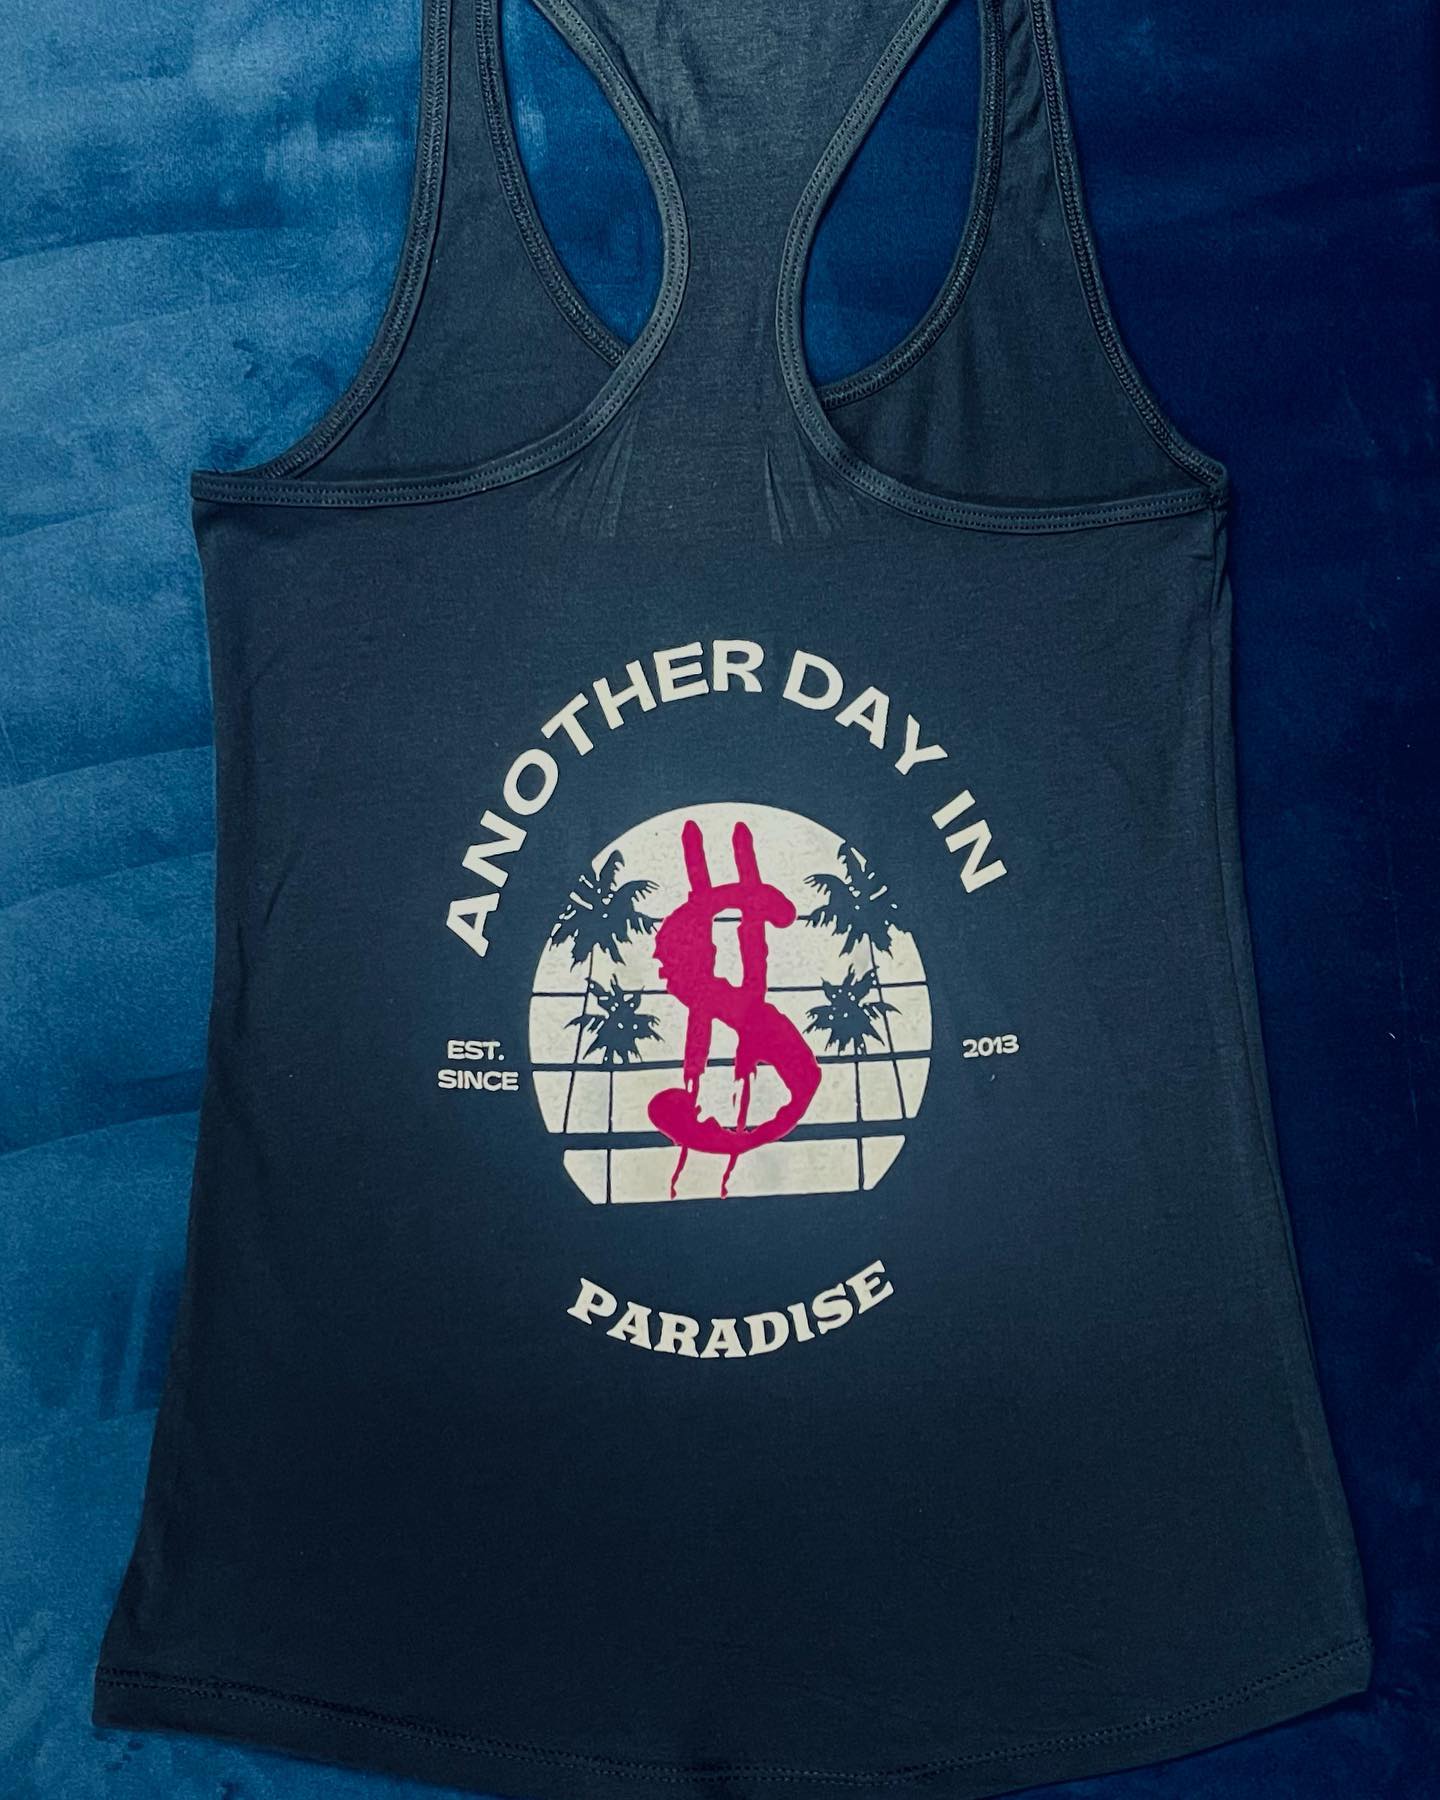 Another Day in Paradise Racerback Tank